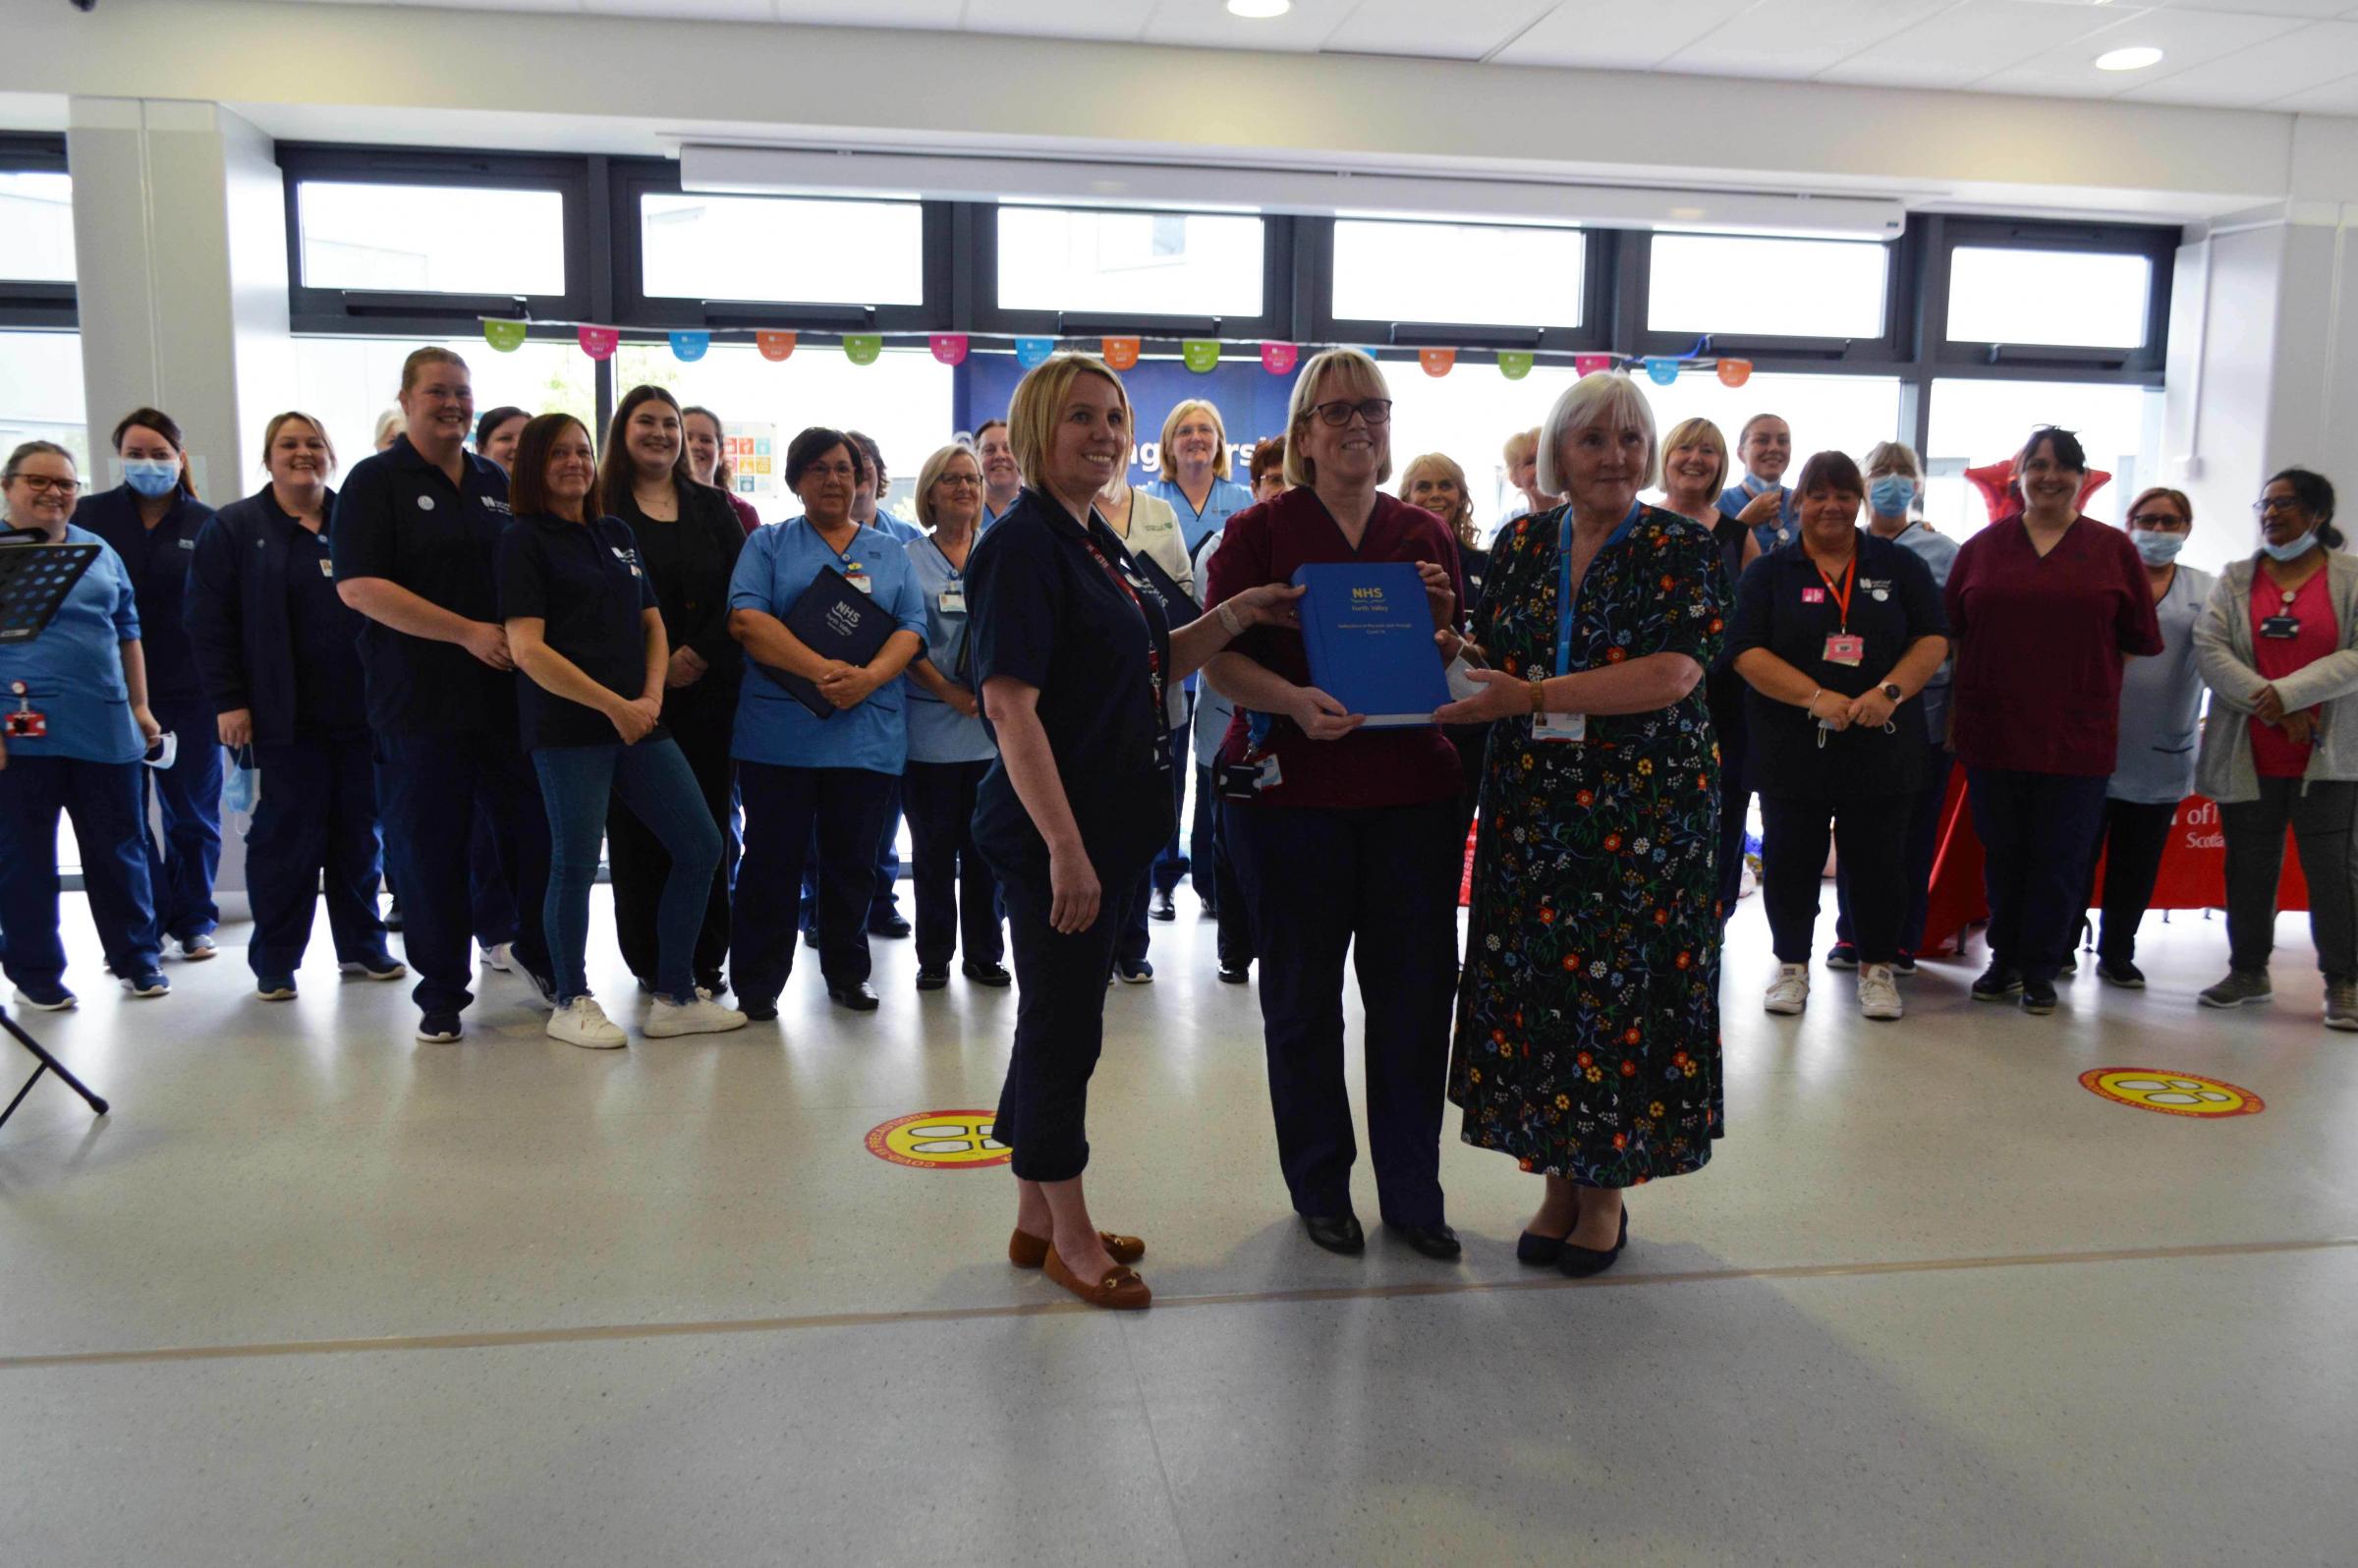 CELEBRATION: International Nurses Day was marked across NHS Forth Valley last Friday